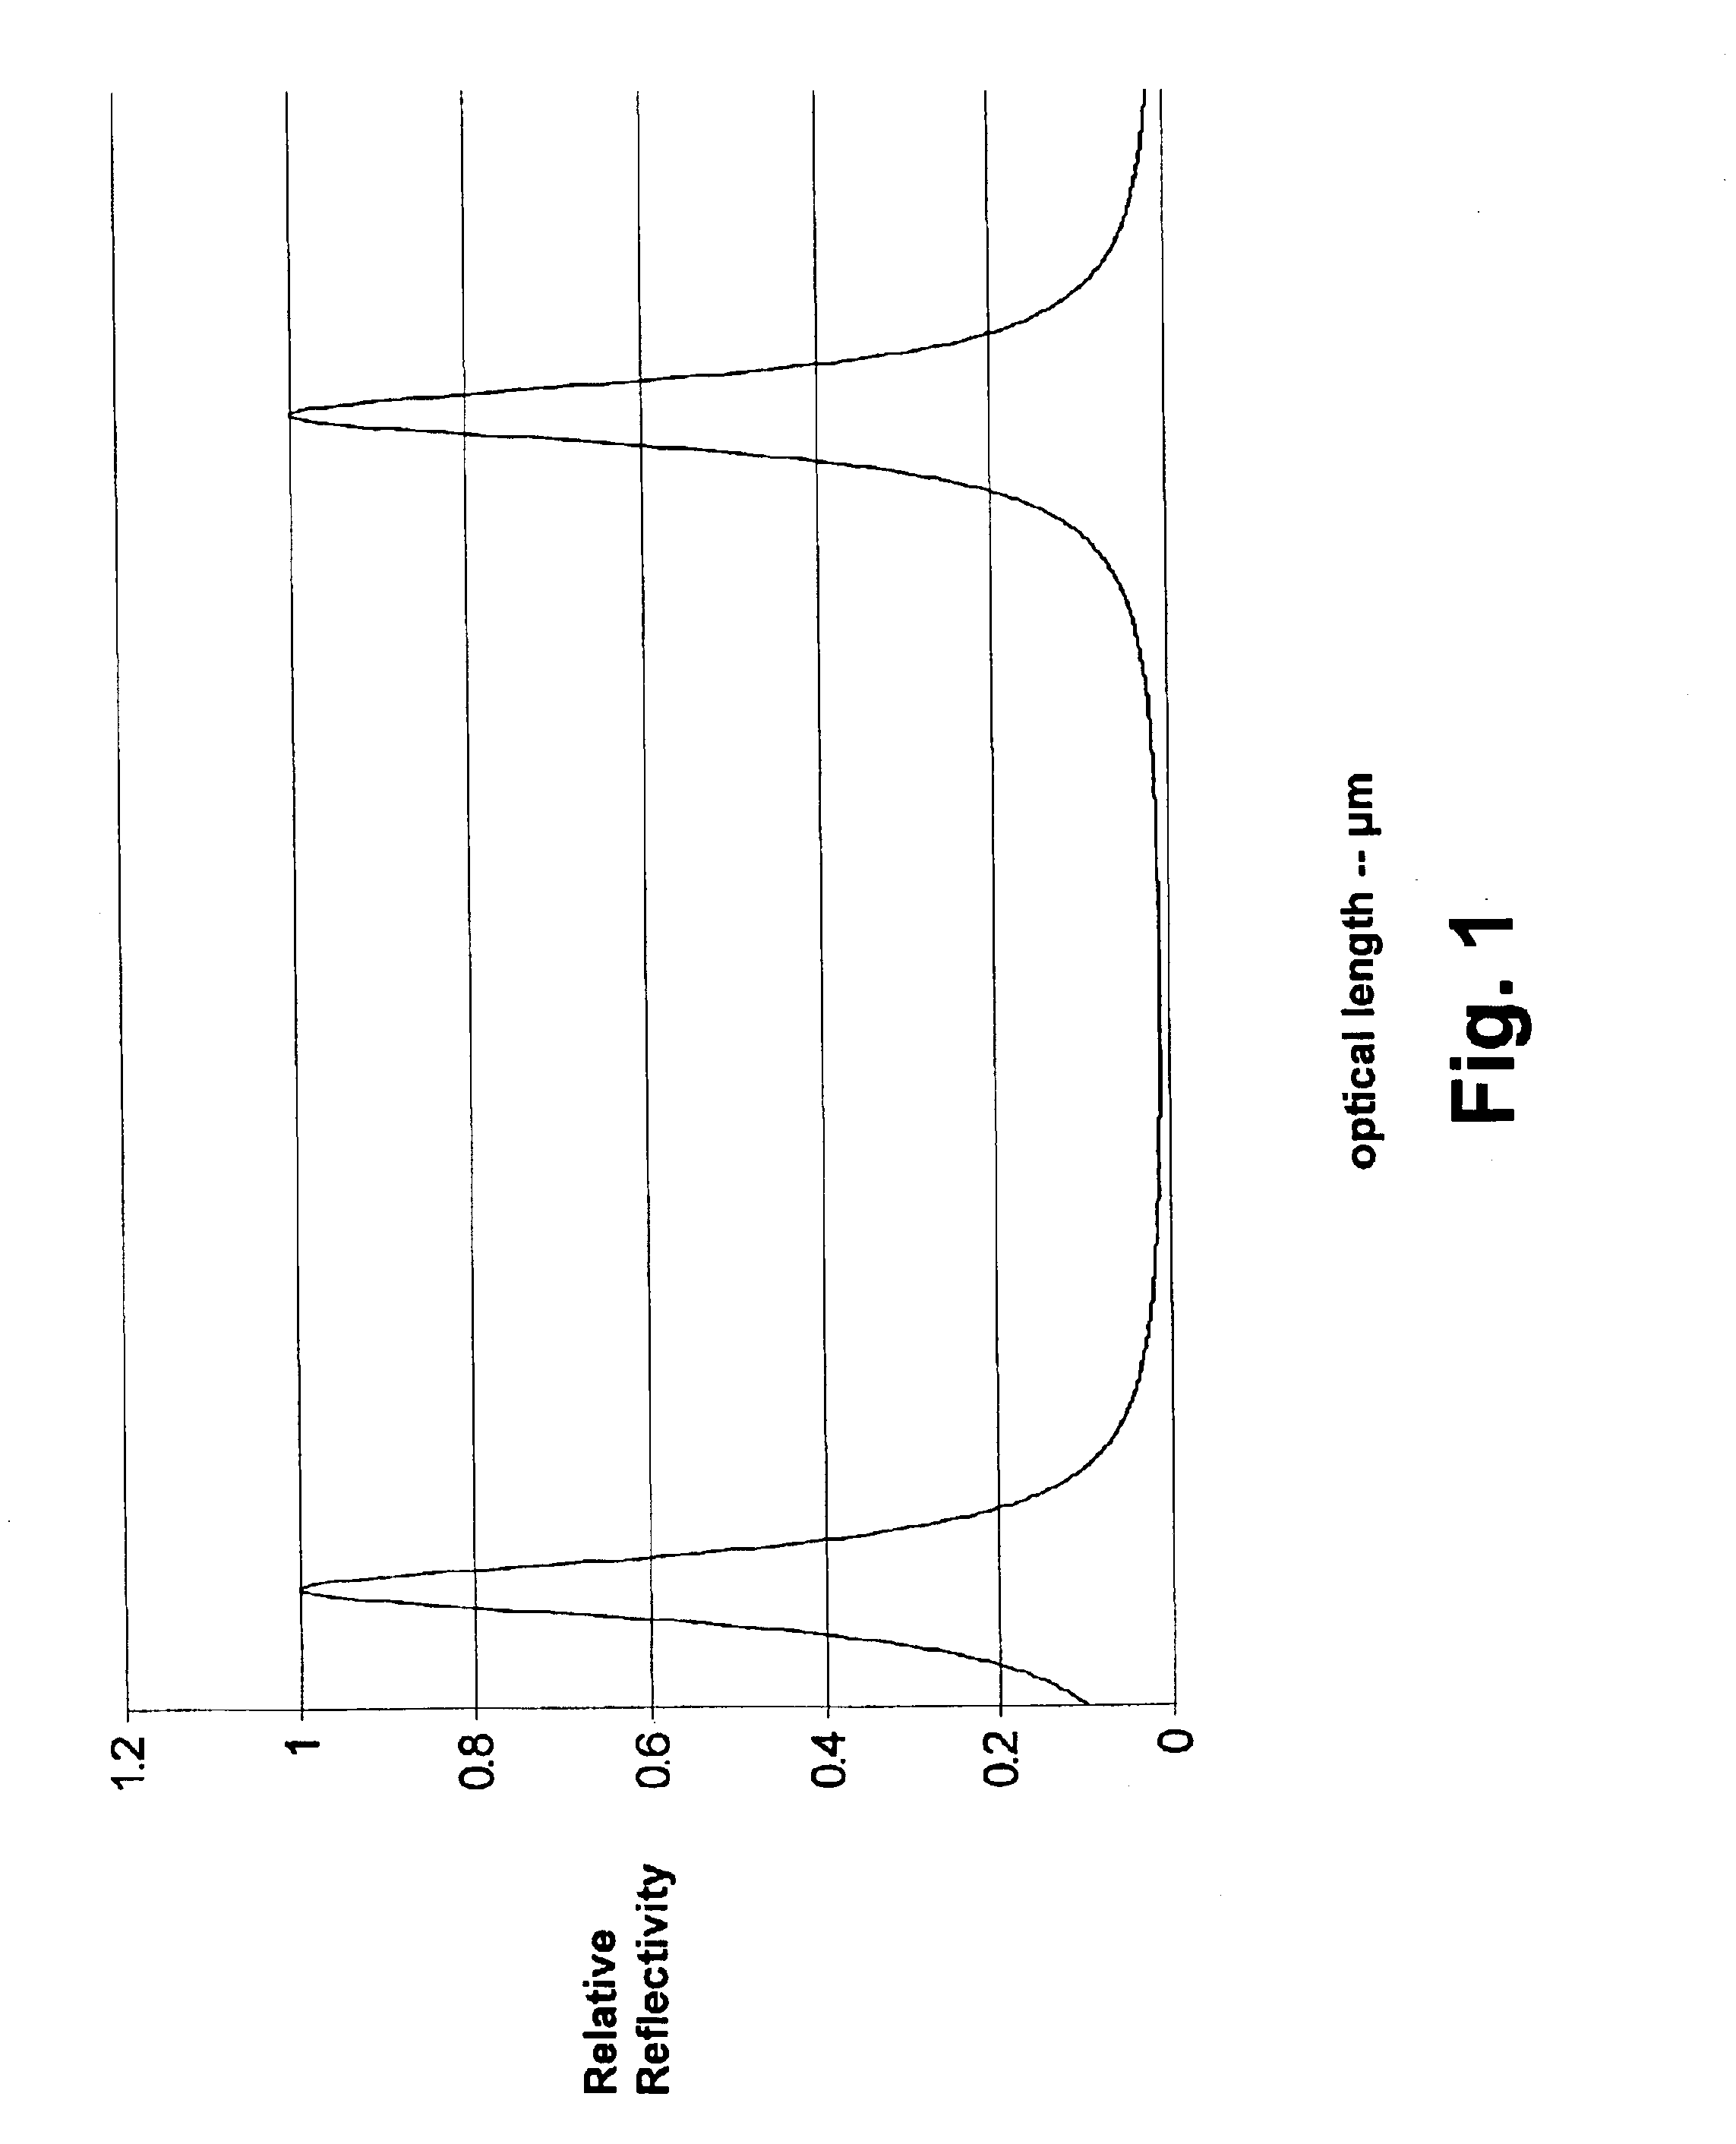 Method and system for performing swept-wavelength measurements within an optical system